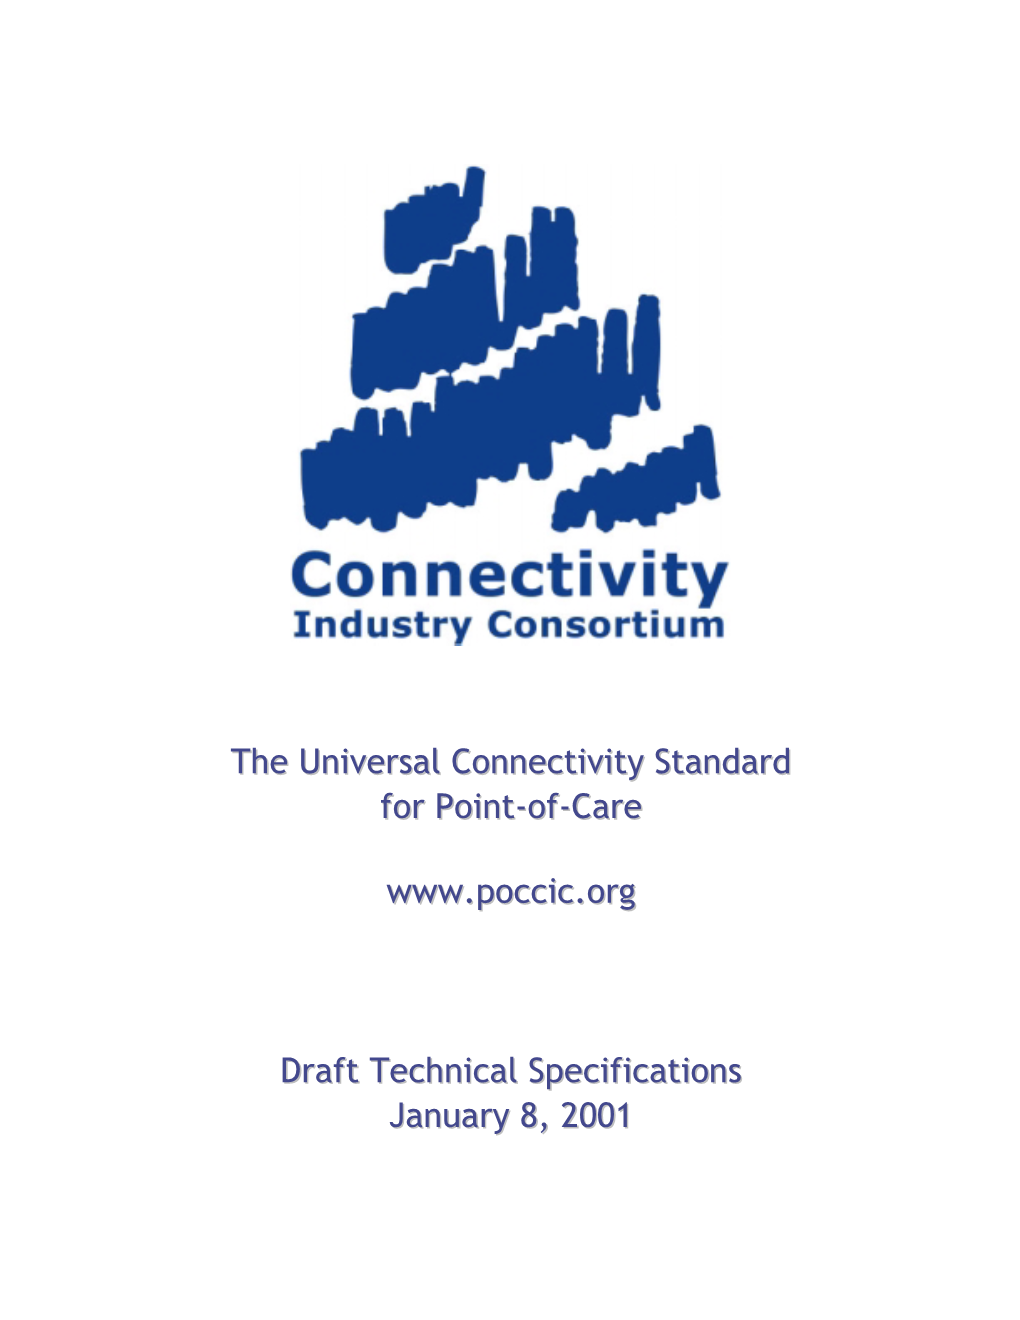 The Universal Connectivity Standard for Point-Of-Care